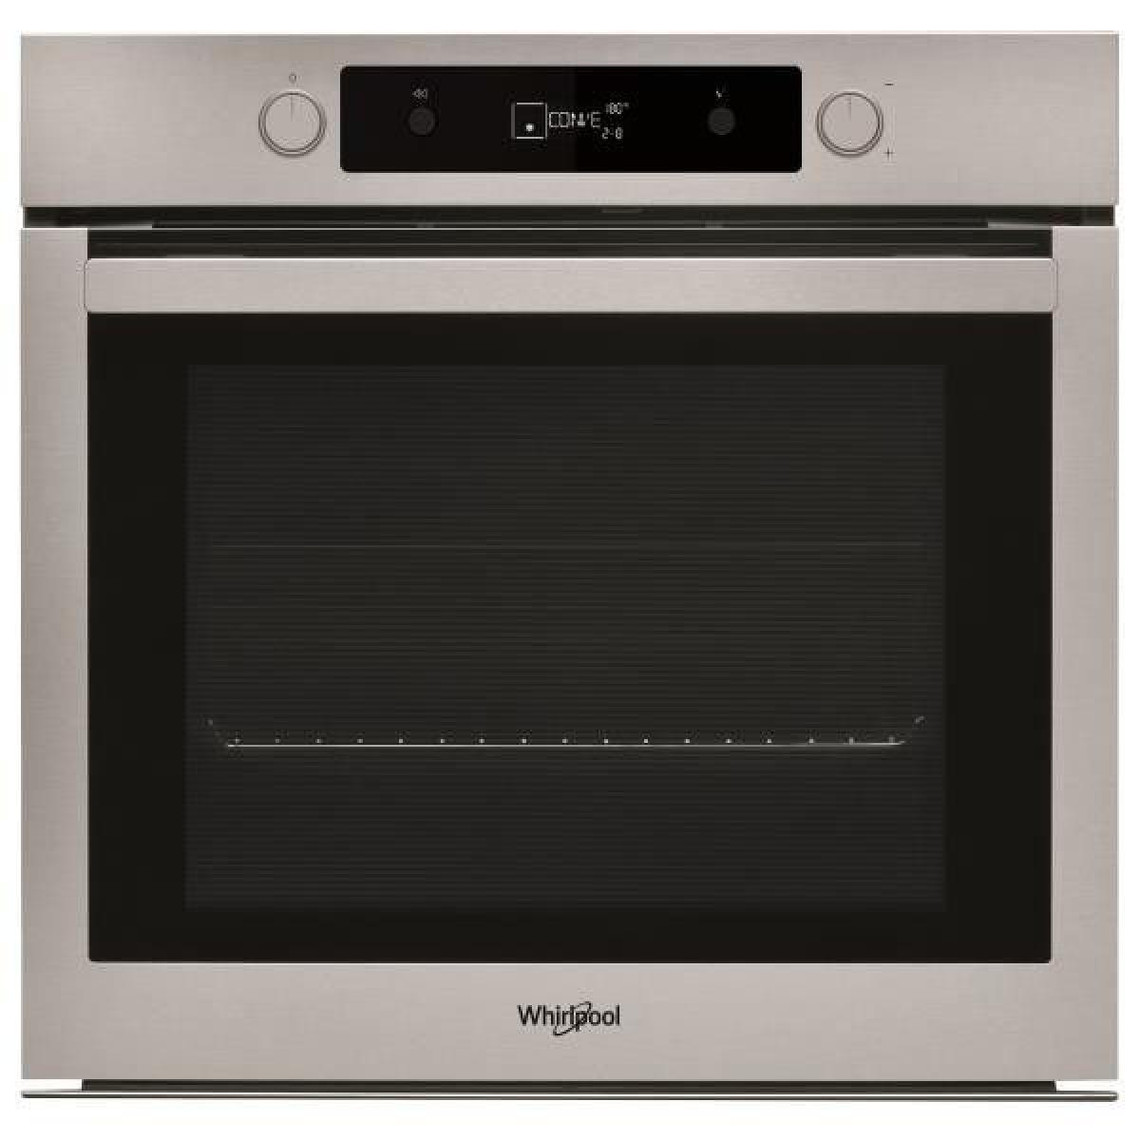 whirlpool Four intégrable multifonction 73l 60cm a pyrolyse inox - oakz9156pix - WHIRLPOOL